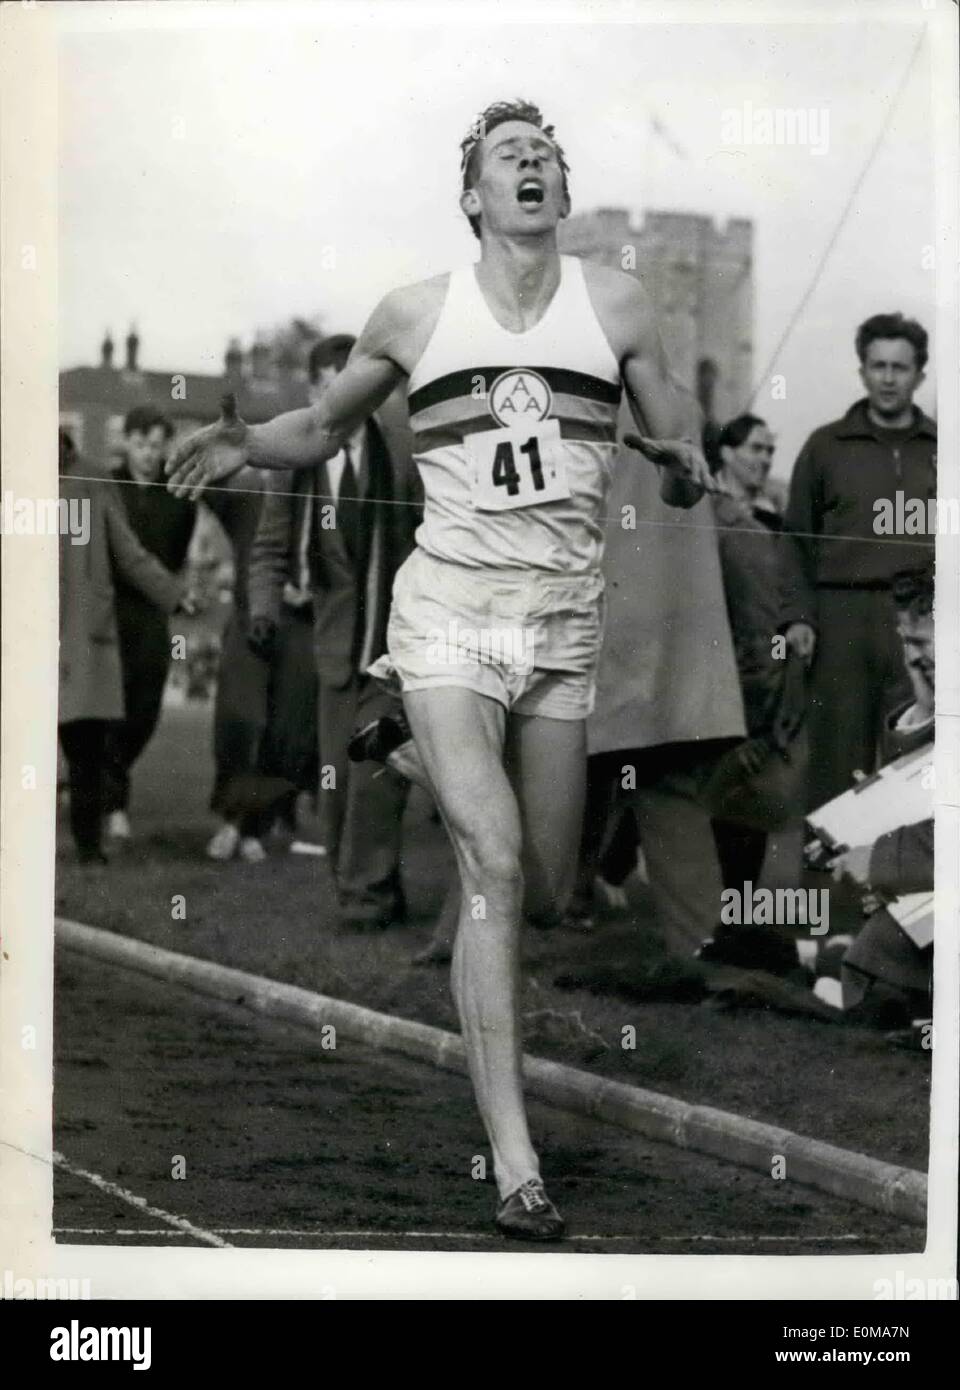 May 05, 1954 - Roger Bannister beats the four minute mile: The famous ...